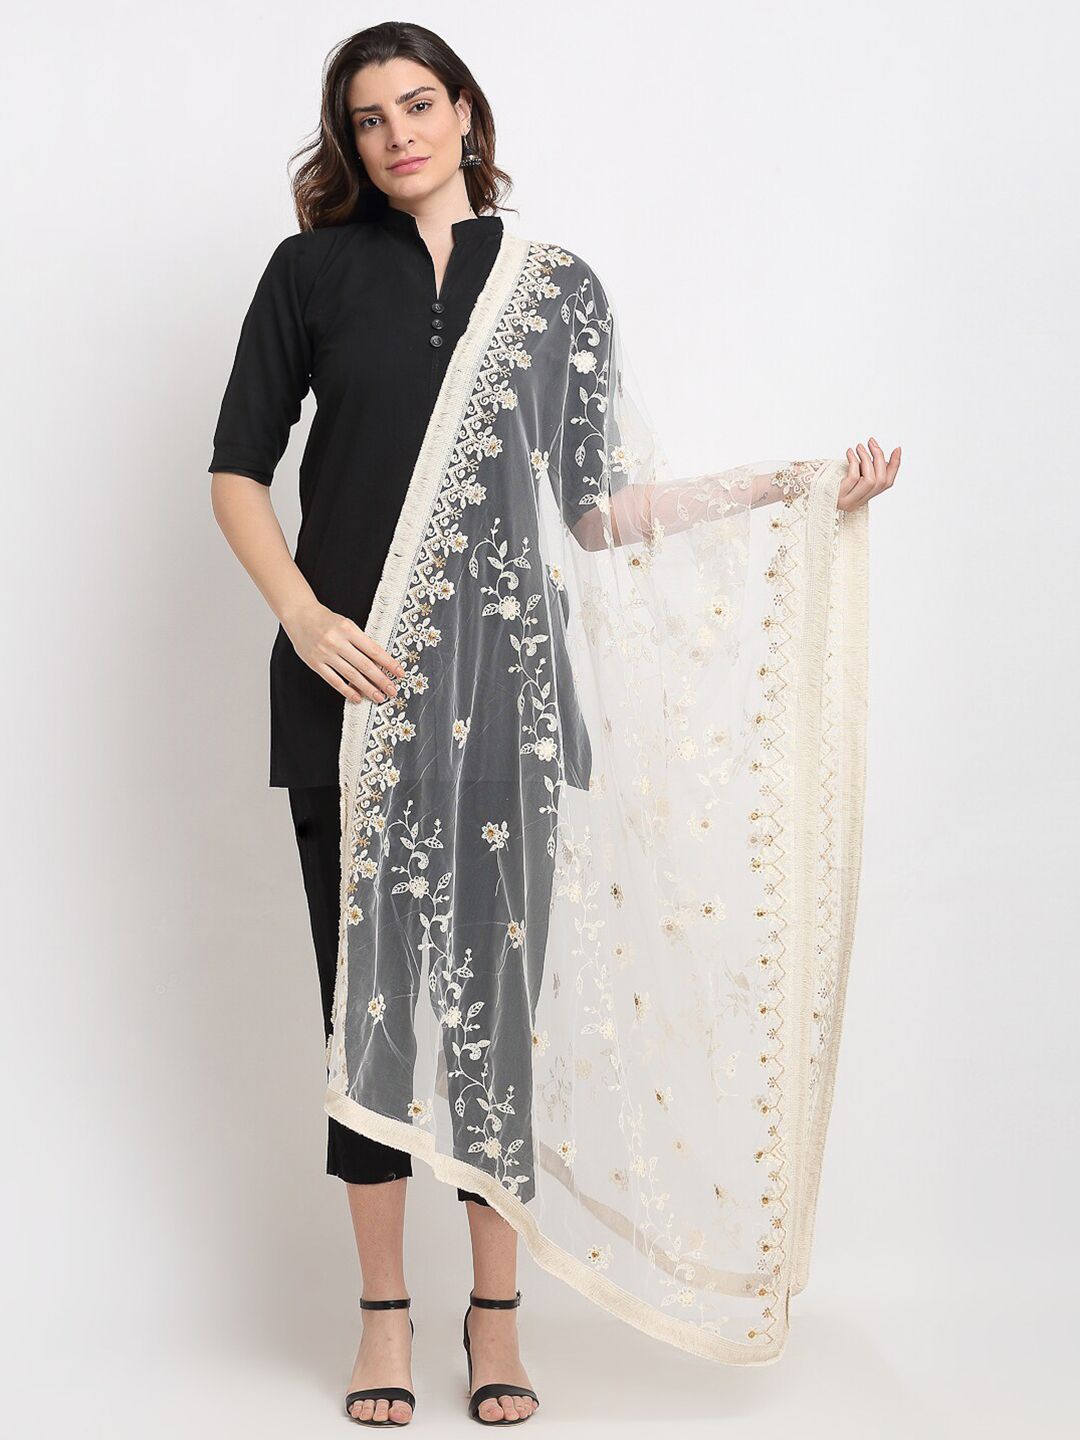 Sugathari White & Gold-Toned Ethnic Motifs Embroidered Dupatta with Beads and Stones Price in India